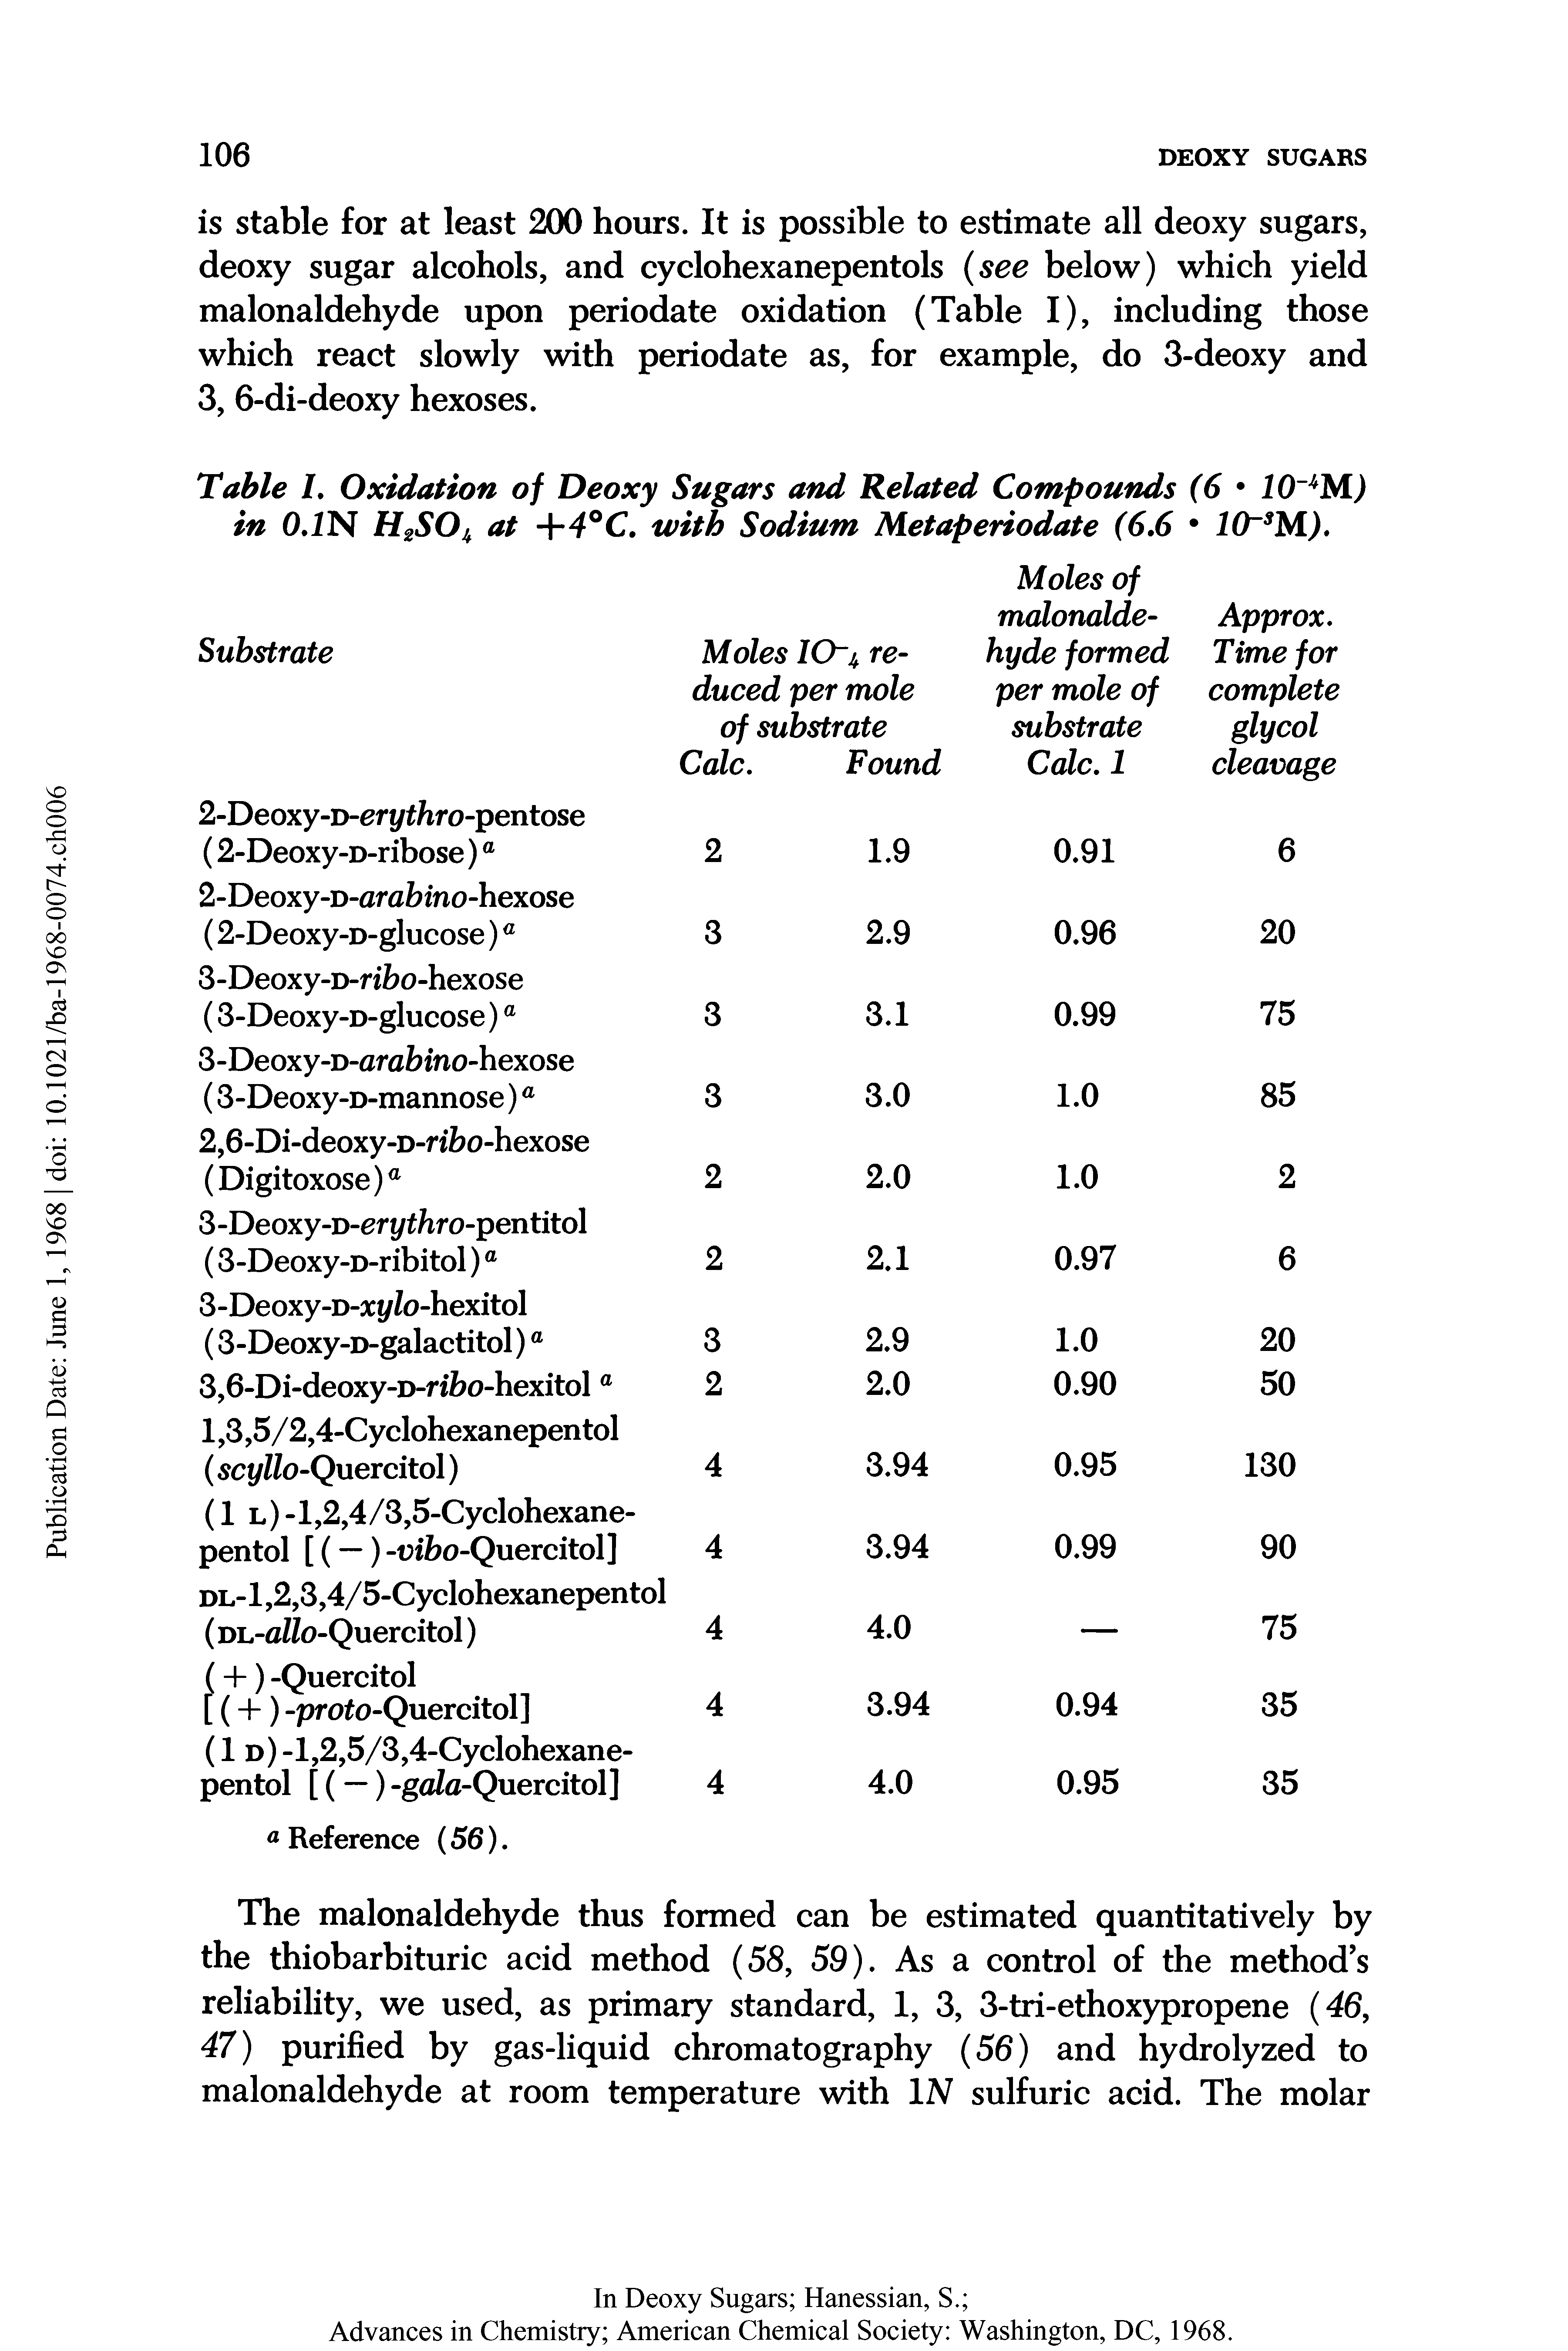 Table I. Oxidation of Deoxy Sugars and Related Compounds (6 10 M) in 0.1 N H2SOu at +4°C. with Sodium Metaperiodate (6.6 10 sM).